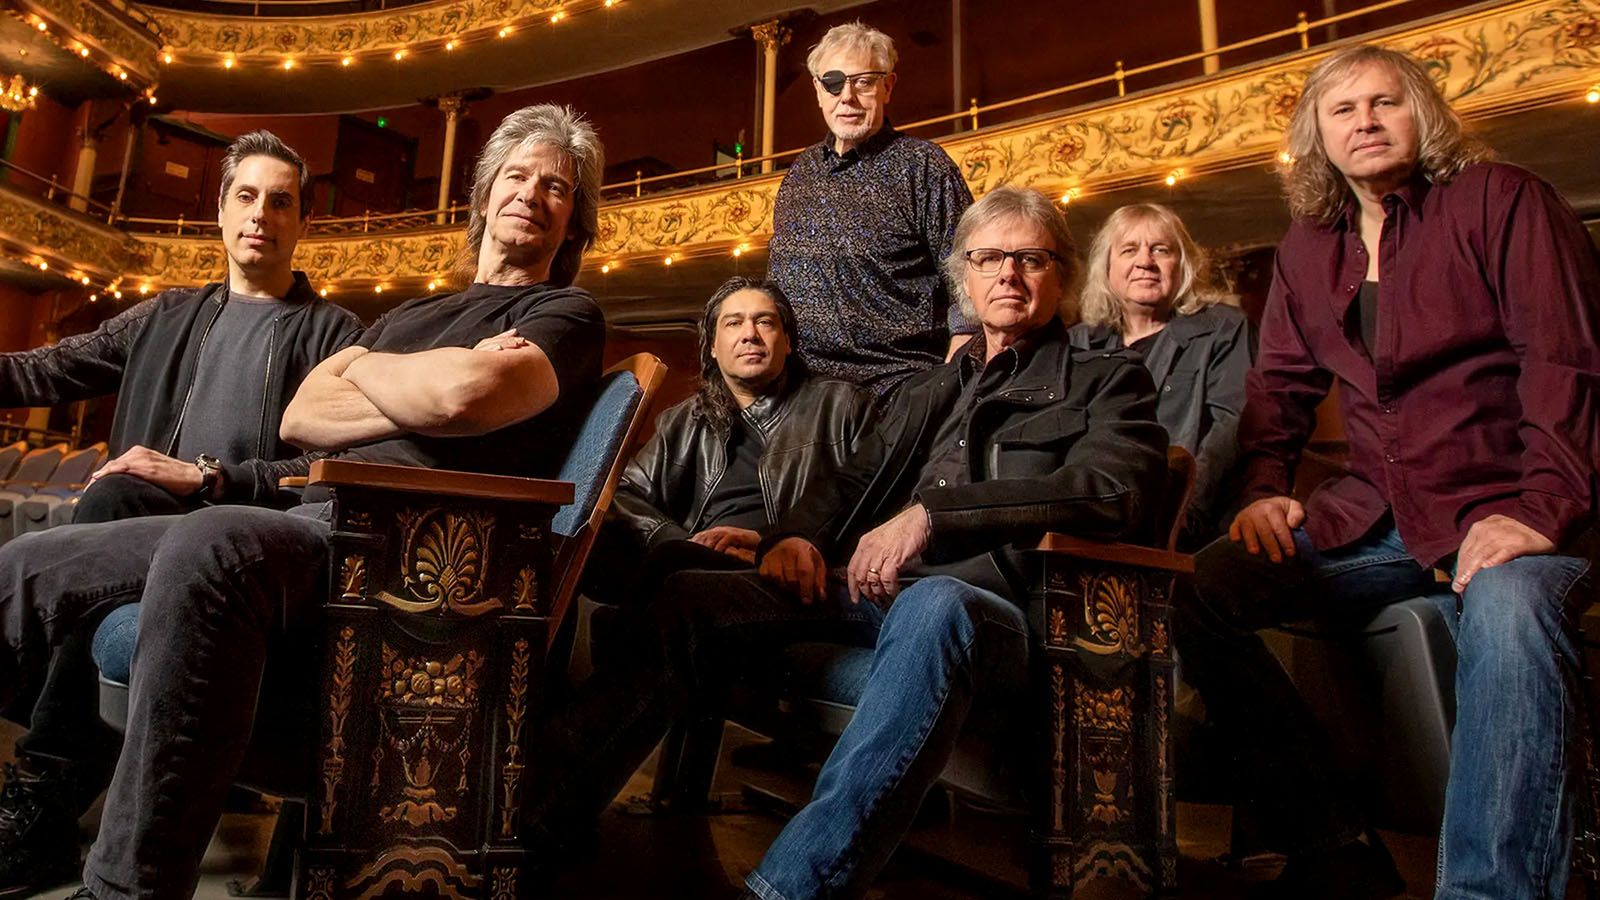 Kansas will be at Embassy Theatre on June 16.